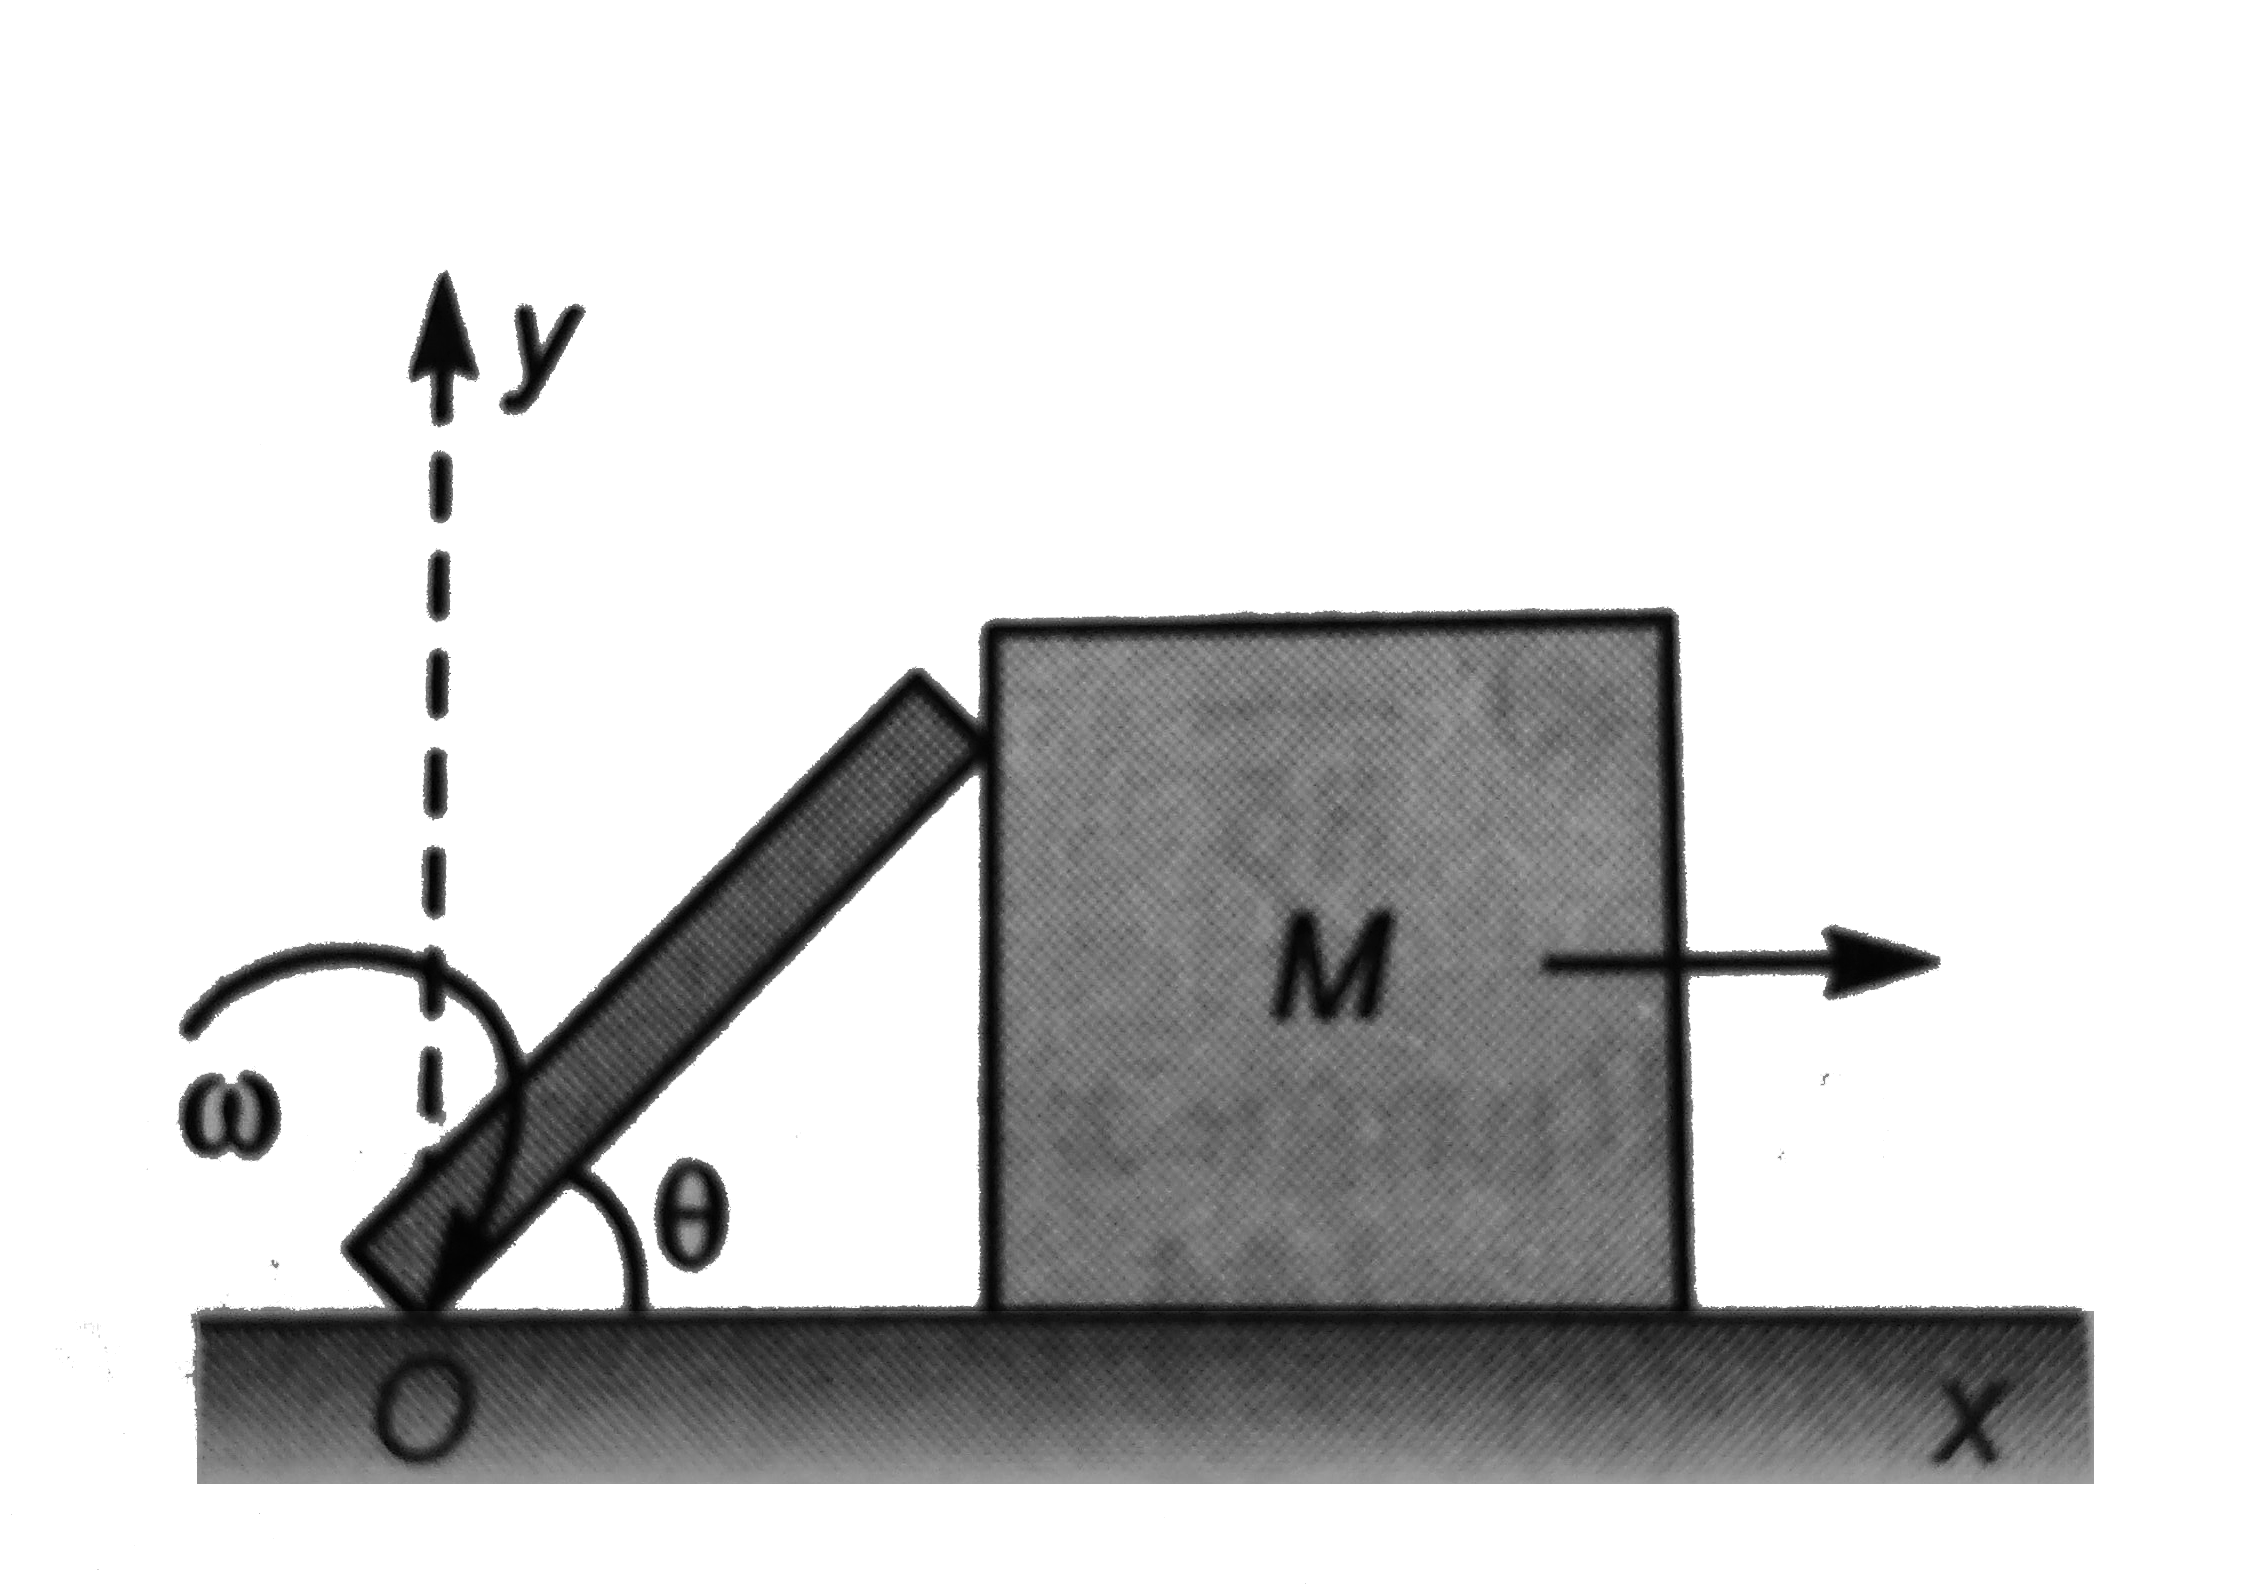 A uniform rod of mass m and length l is applied pivoted at point O. The rod is initially in vertical position and touching a block of mass M which is at rest on a horizontal surface. The rod is given a slight jerk and it starts rotating about point O this causes the block to move forward as shown The rod loses contact with the block at theta=30^(@) all surfaces are smooth now answer the following questions.   Q. The velocity of block when the rod loses contact with the block is